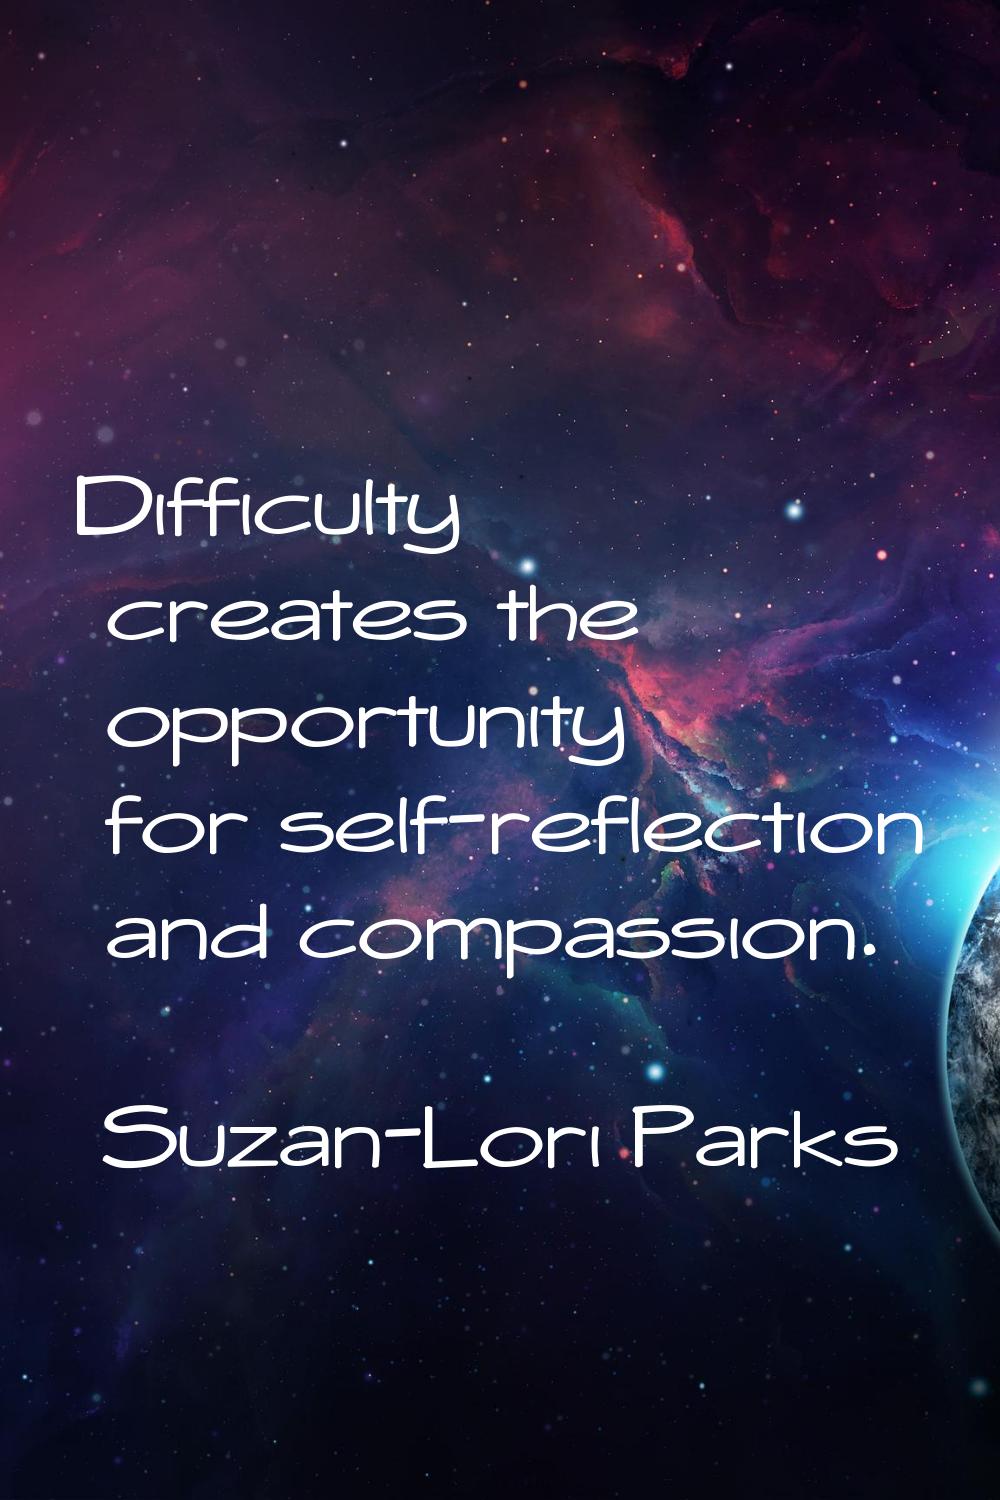 Difficulty creates the opportunity for self-reflection and compassion.